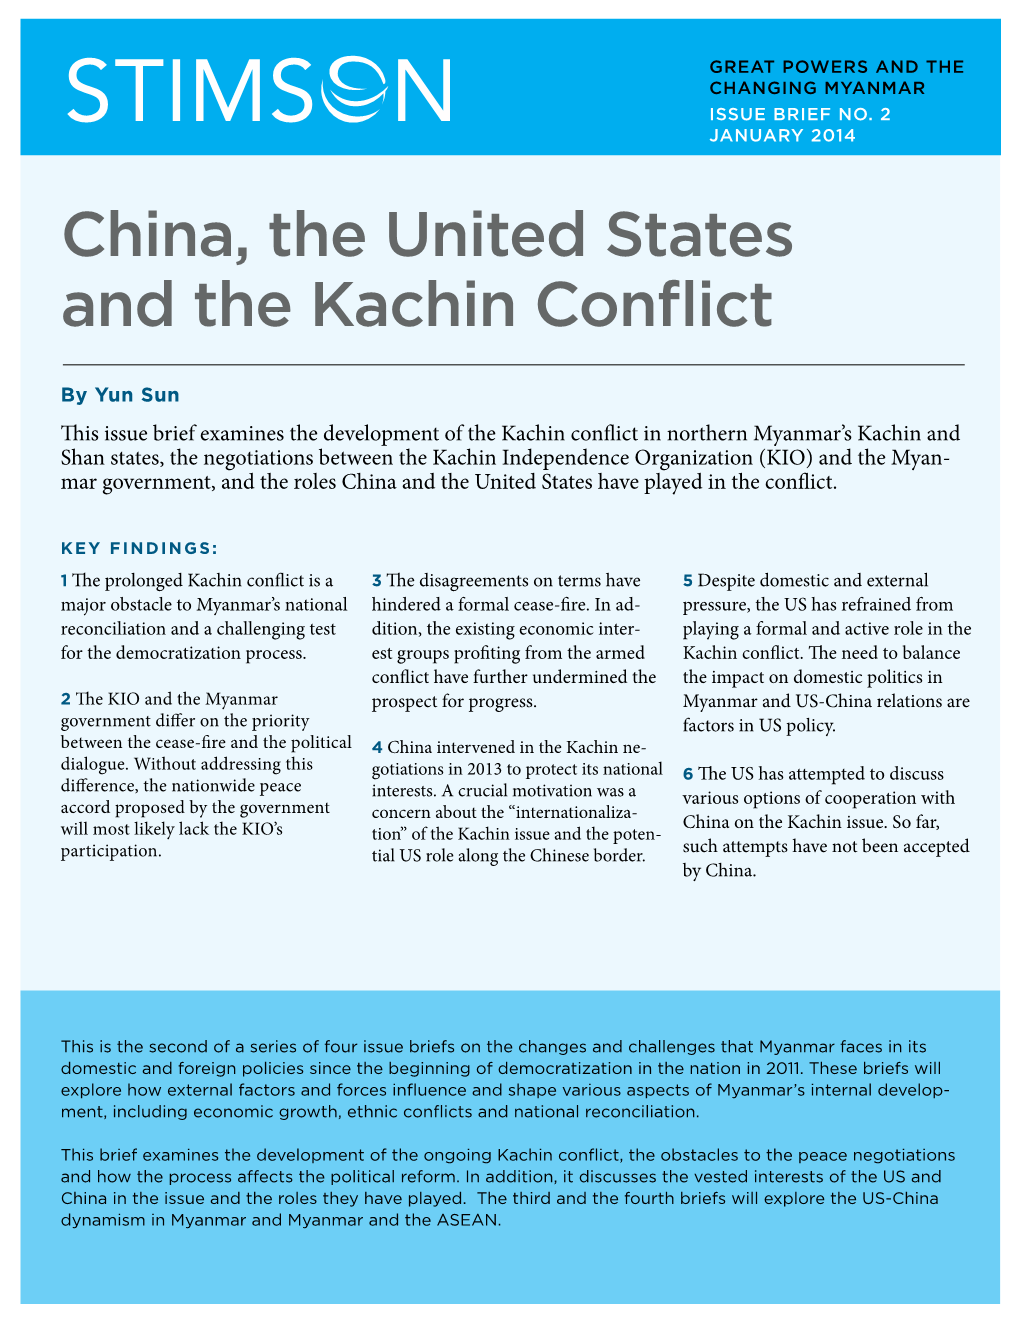 China, the United States and the Kachin Conflict Great Powers and the Changing Myanmar Issue Brief No